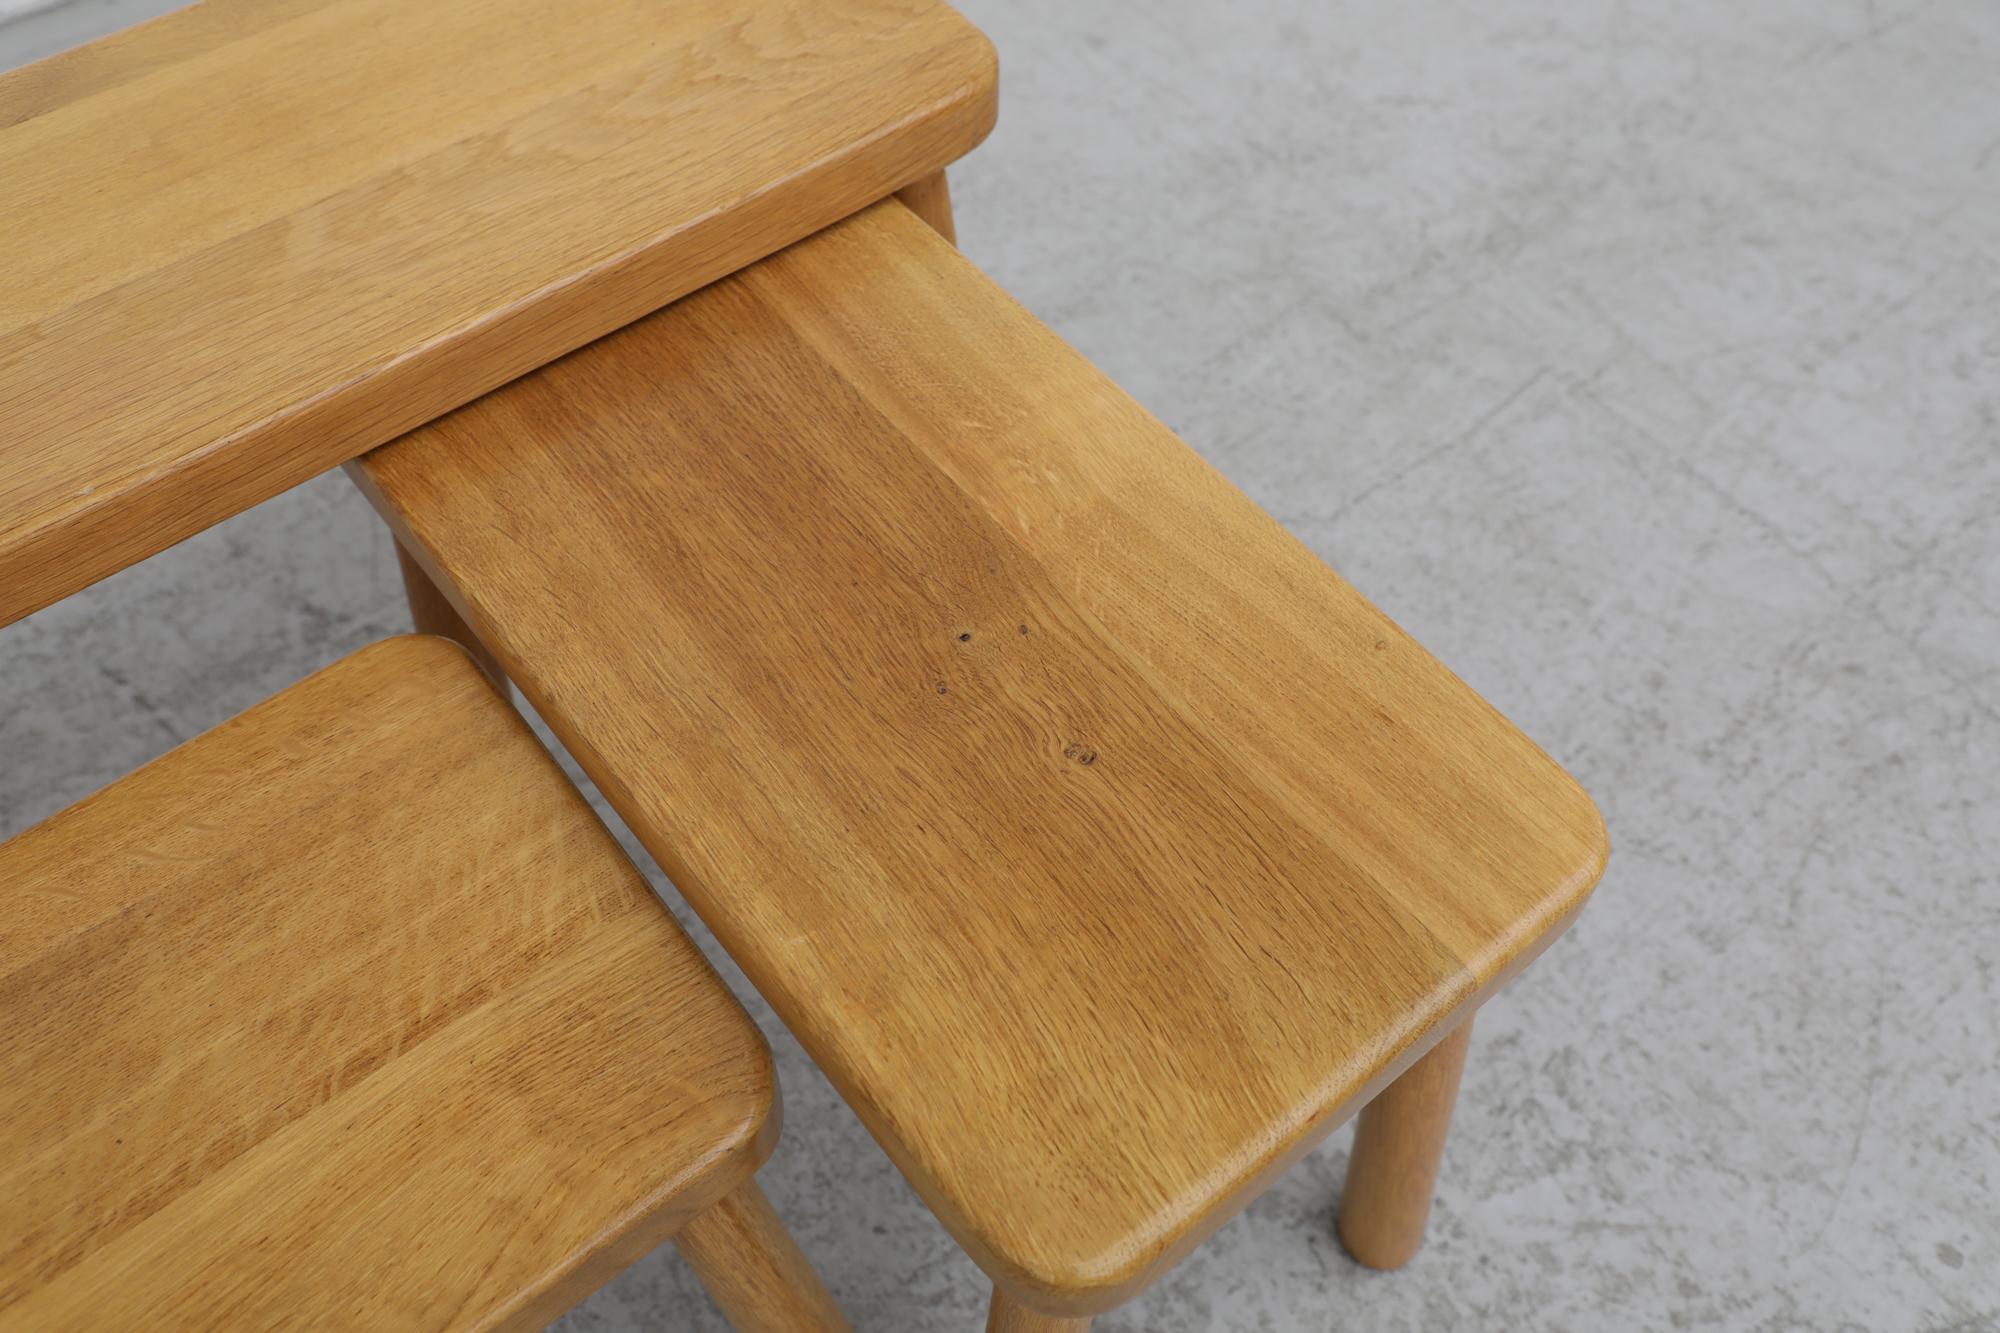 Set of 3 Charlotte Perriand Style Skinny Oak Nesting Tables with Rounded Edges For Sale 5